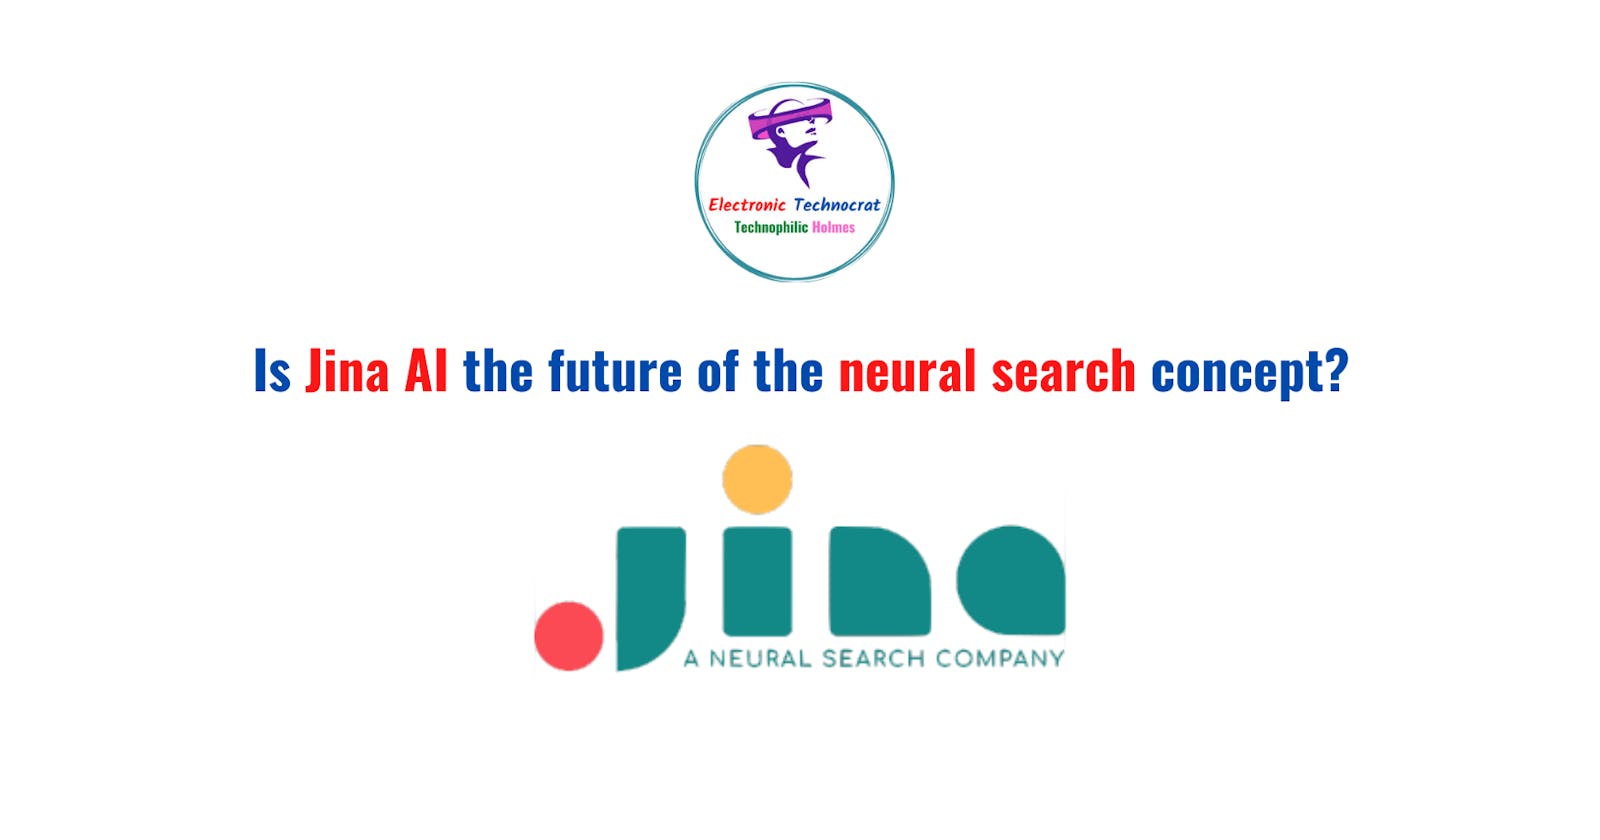 Is Jina AI the future of the neural search concept?